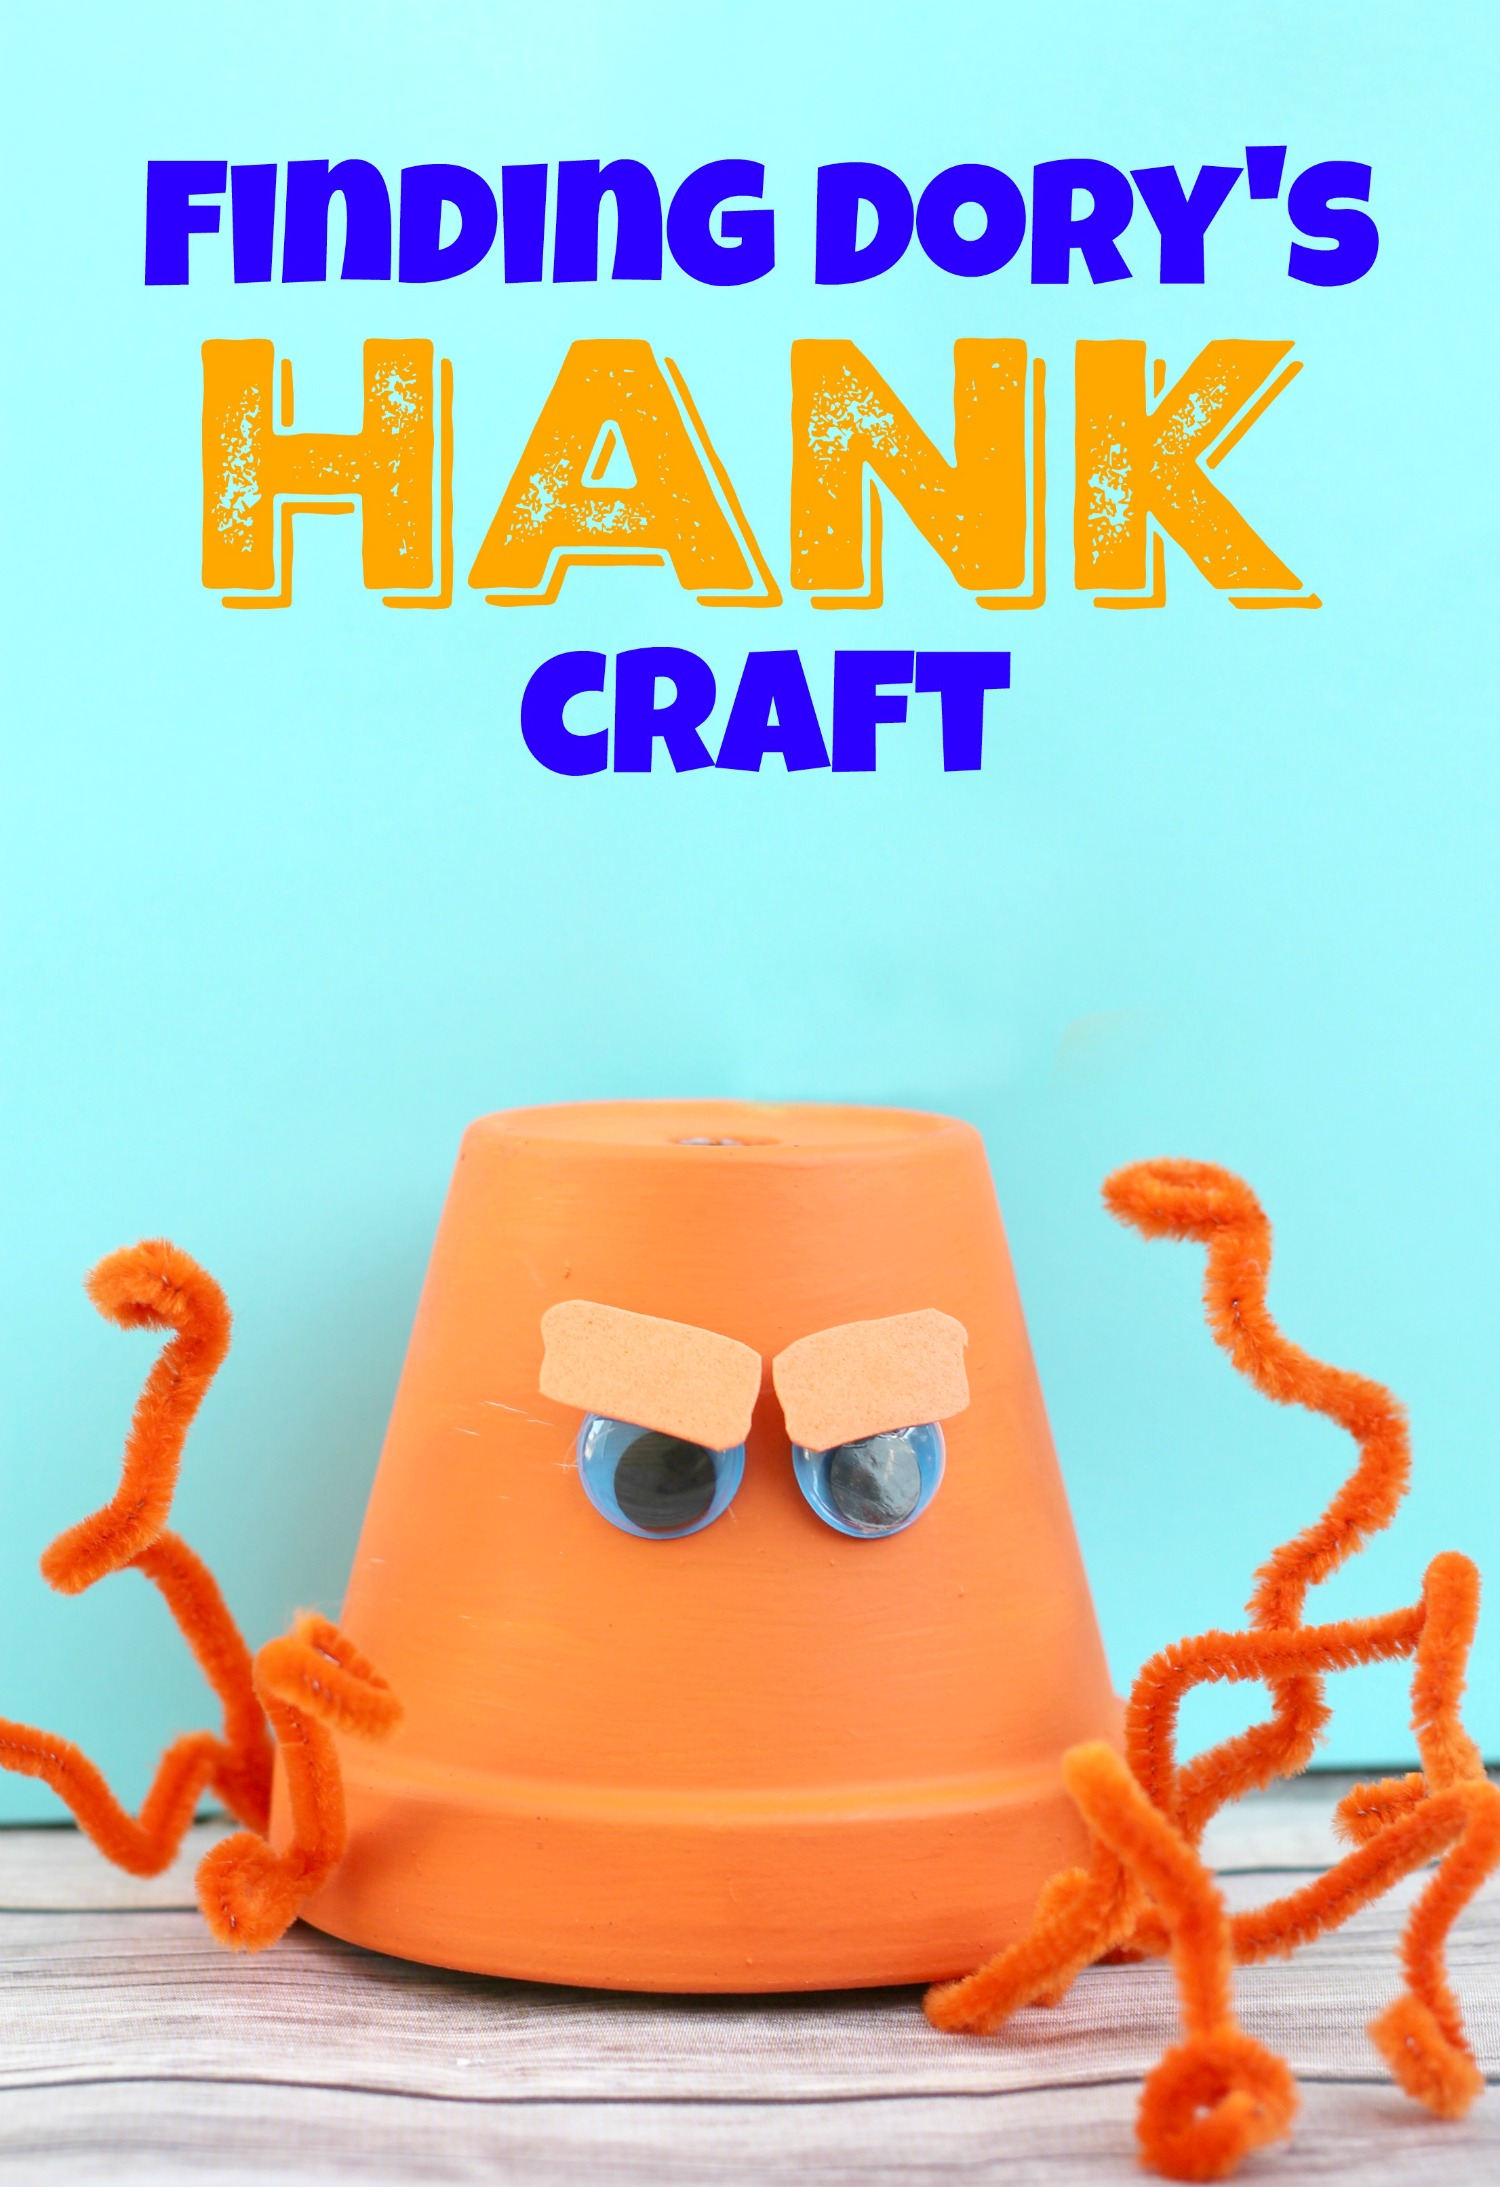 Enjoy the last few days of summer crafting with your children. Start with this fun Finding Dory Hank craft.